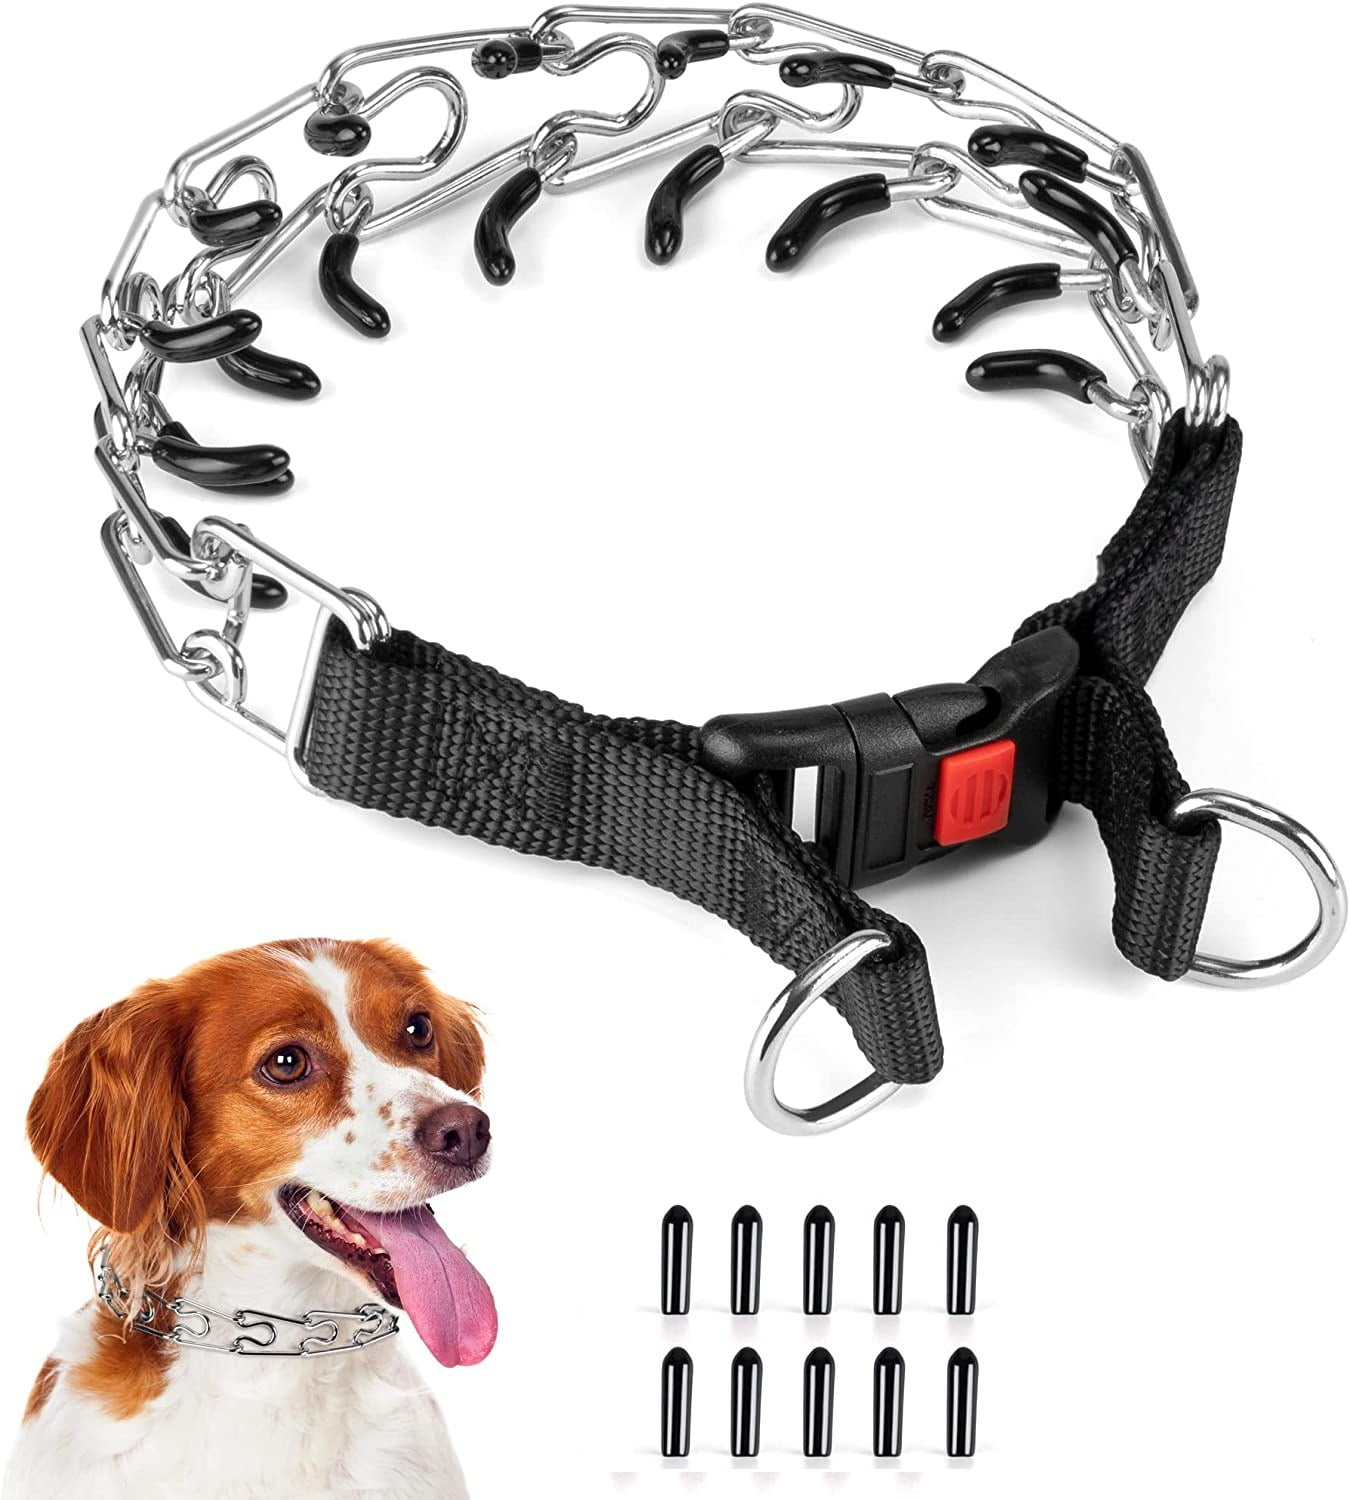 Companet Dog Prong Collar with Protector Heavy Duty Leash for Medium Large Dogs Choke Pinch Training Collar 2.5 mm x 17.7 Adjustable Links with Comfort Rubber Tips 